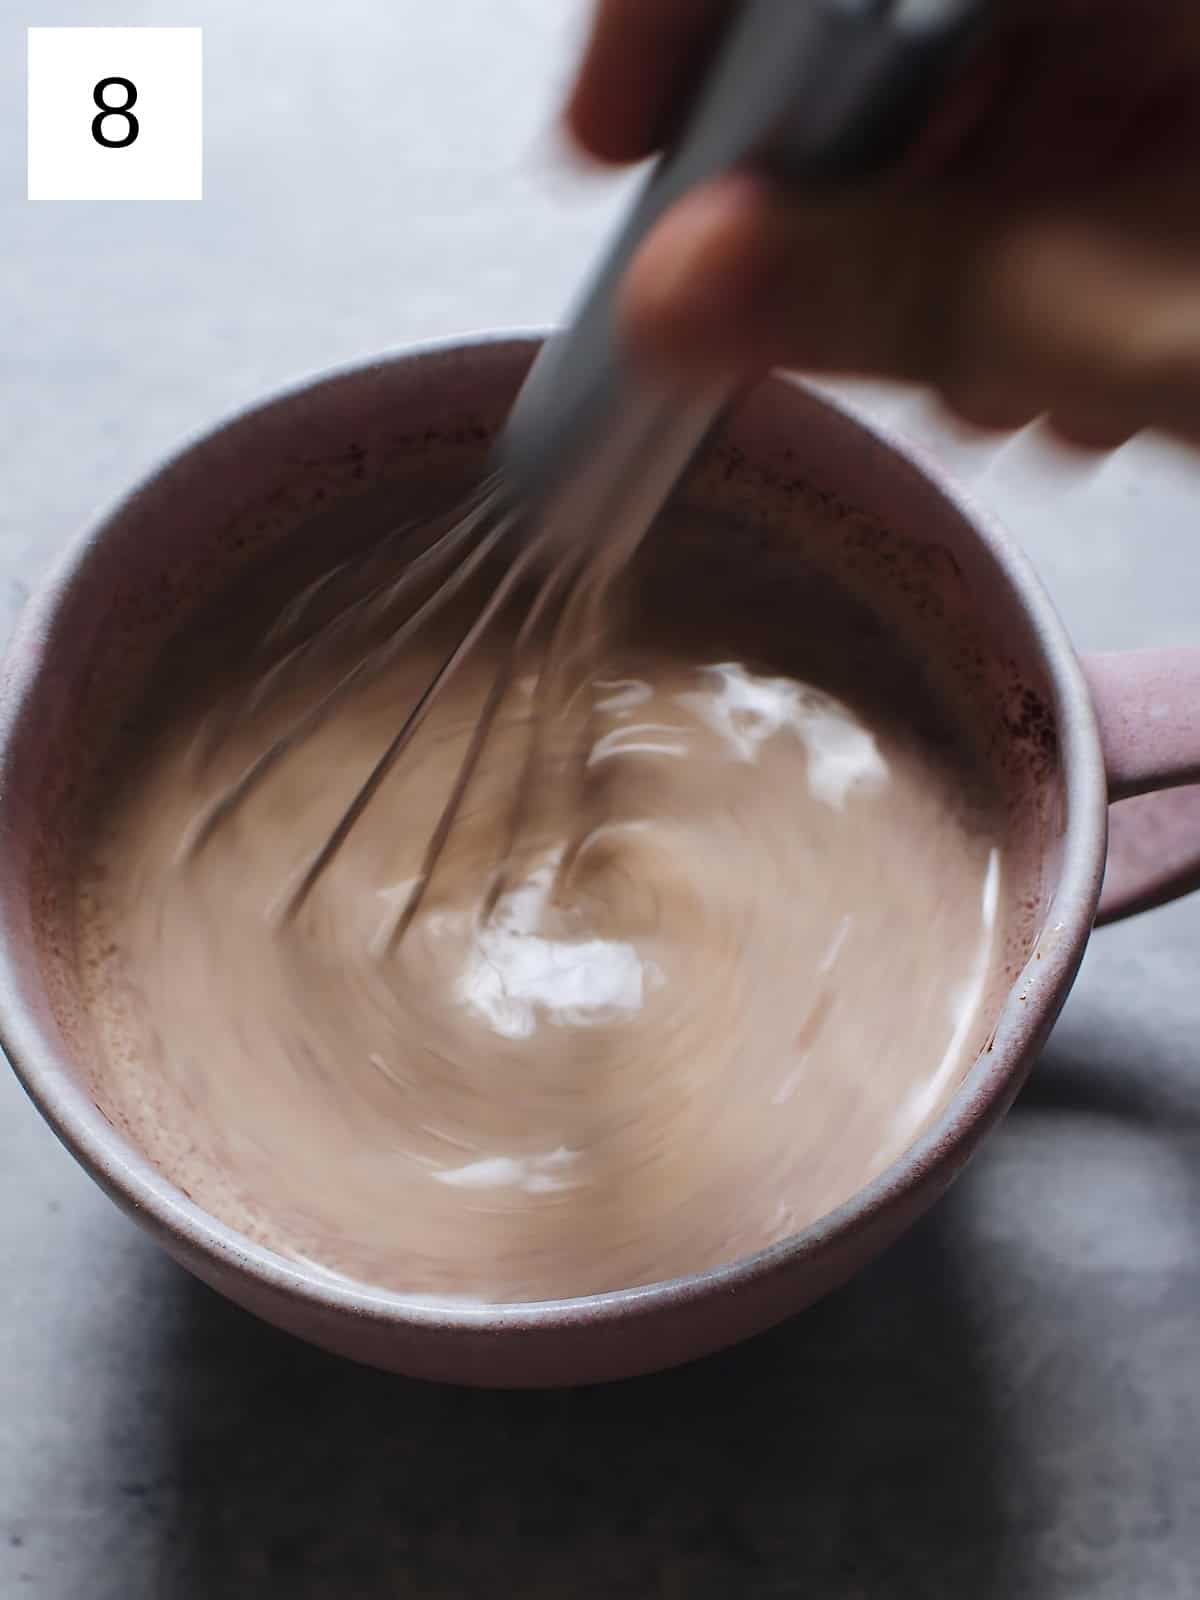 Melted chocolate mixture in a cup being mixed with a whisk.